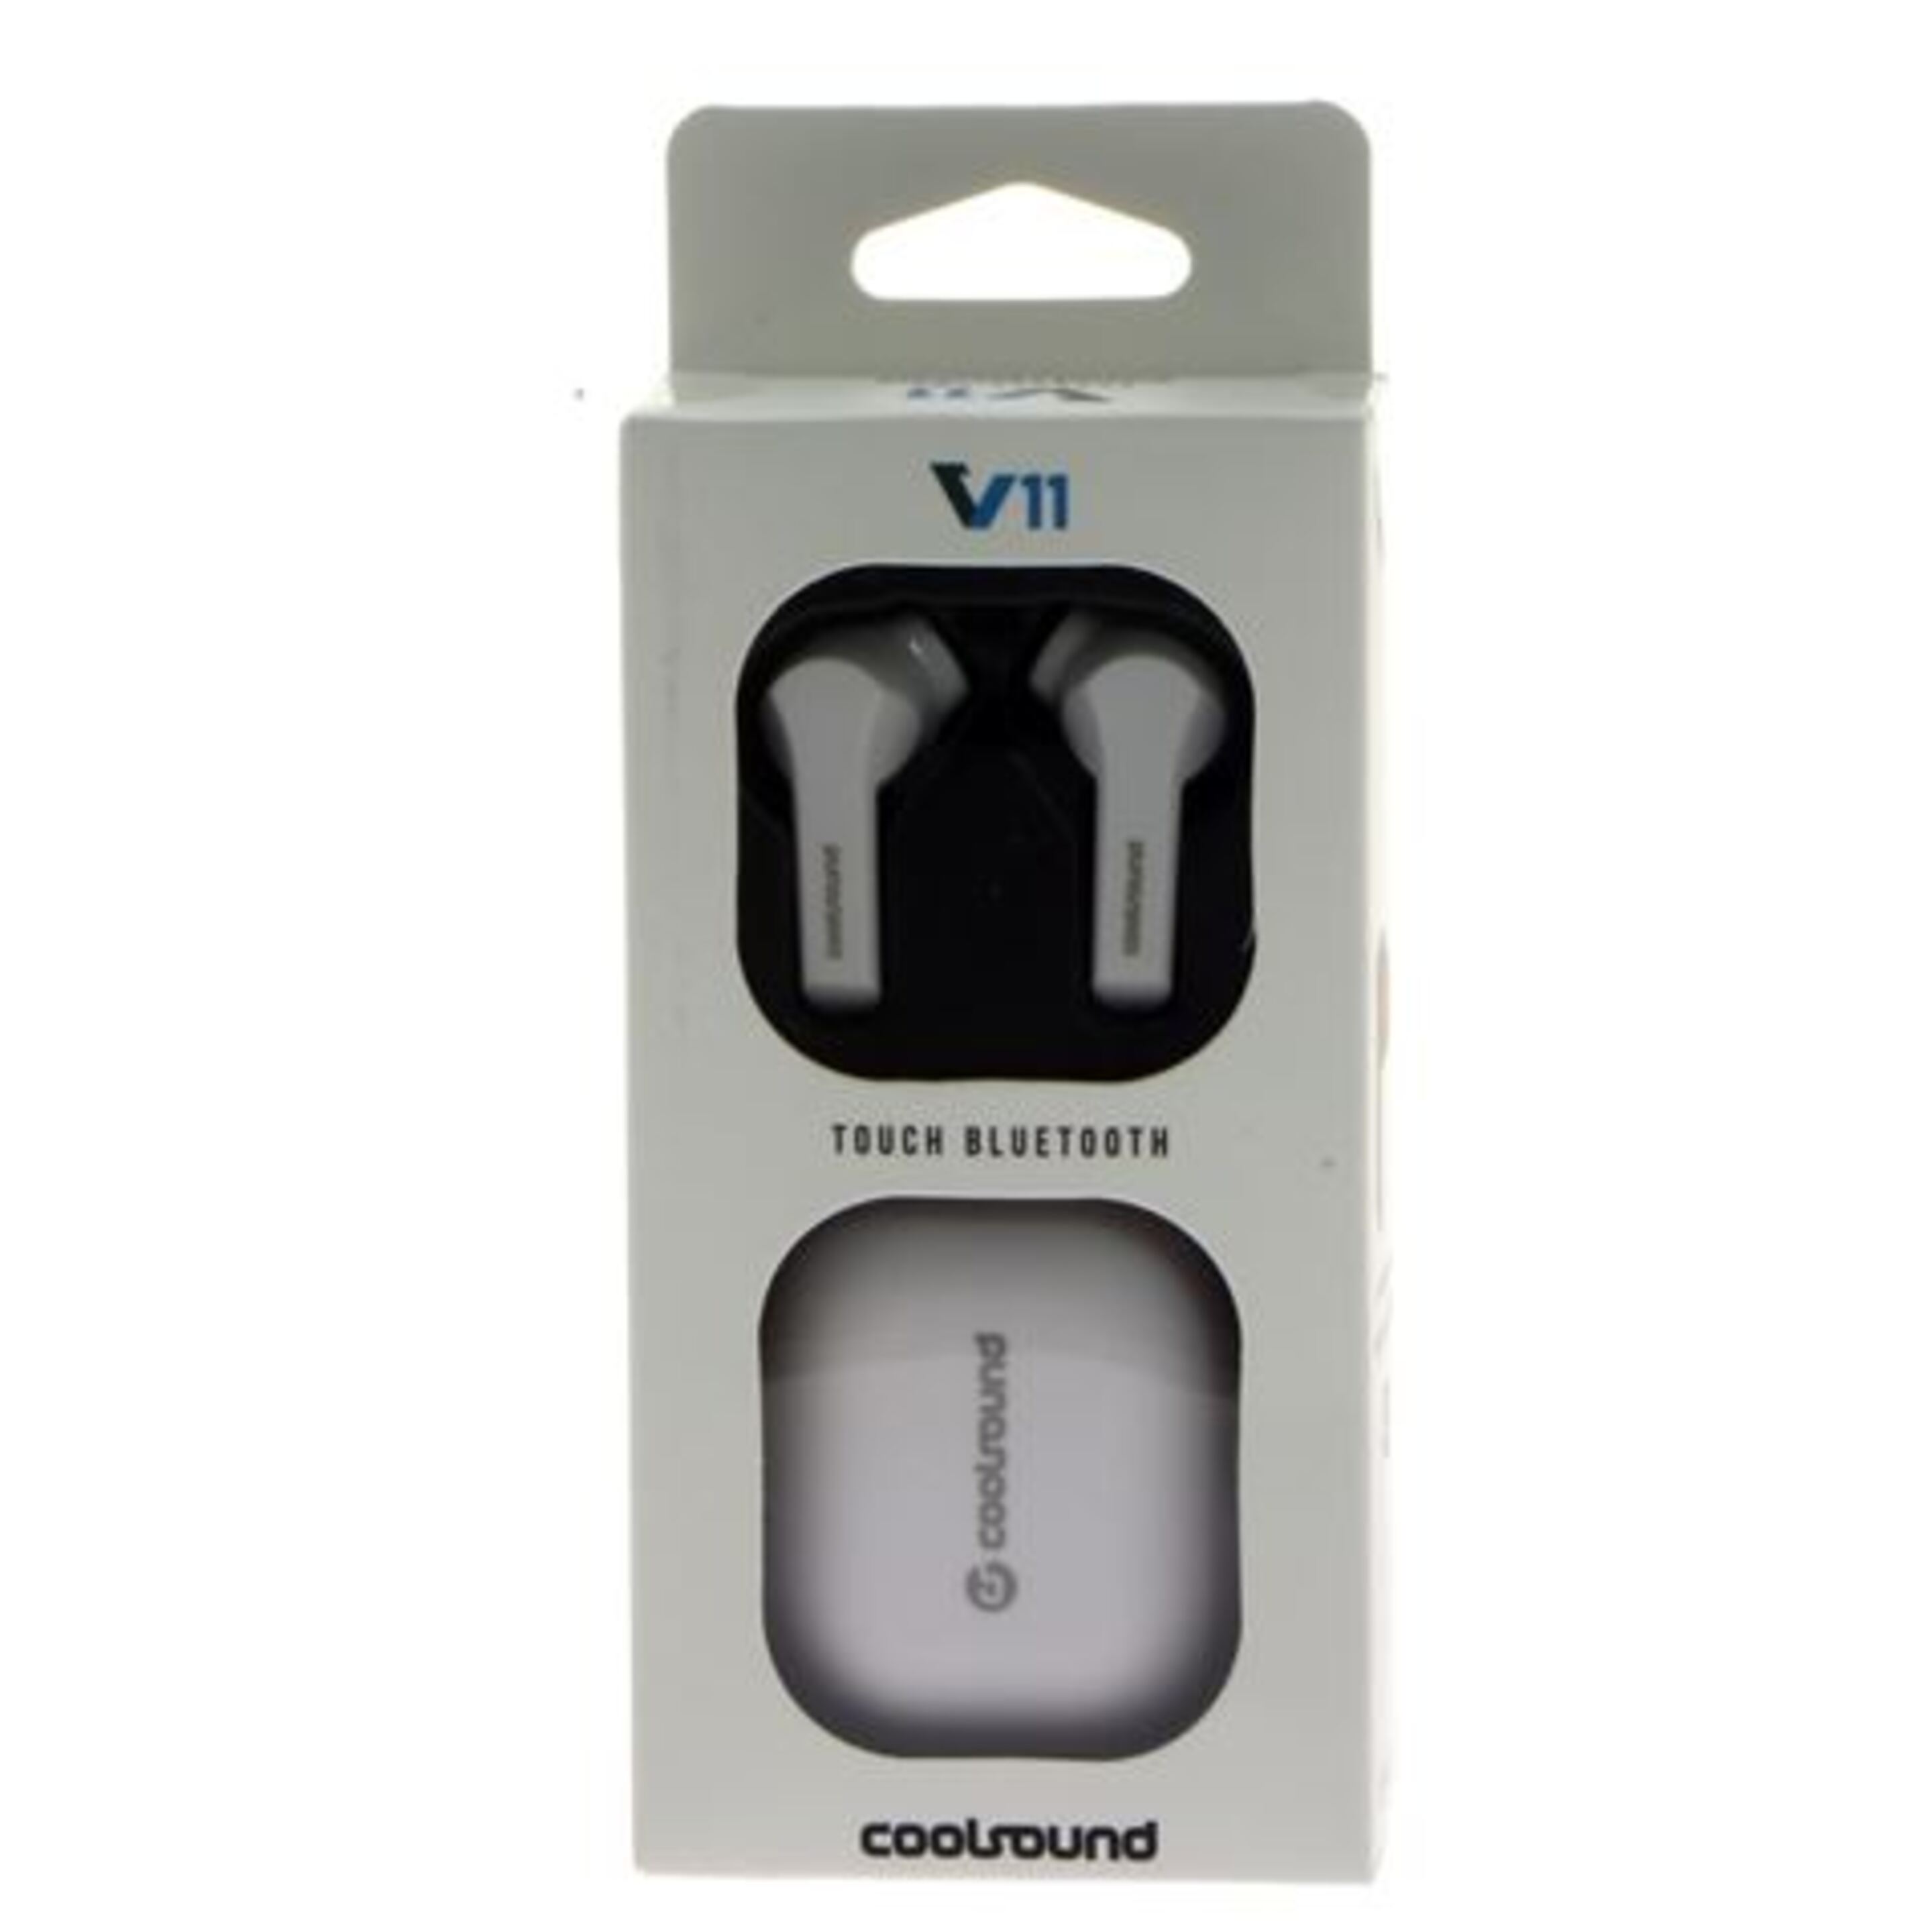 Auriculares Earbuds Tws V11 Touch Bluetooth 5.0 Coolsound Blanco - Blanco  MKP